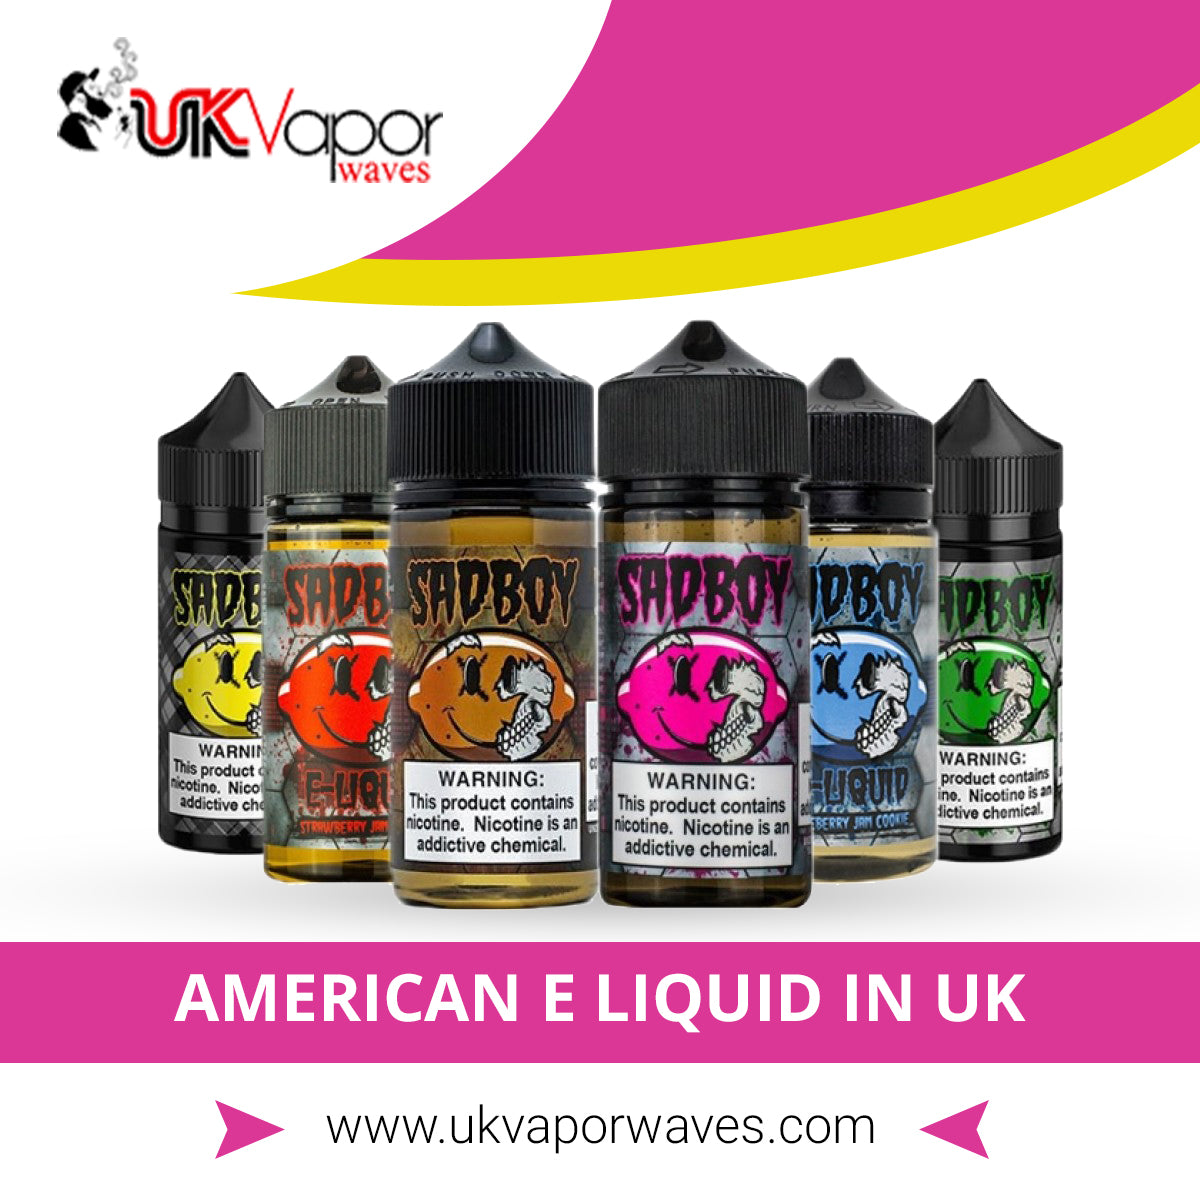 All About The Smok UK